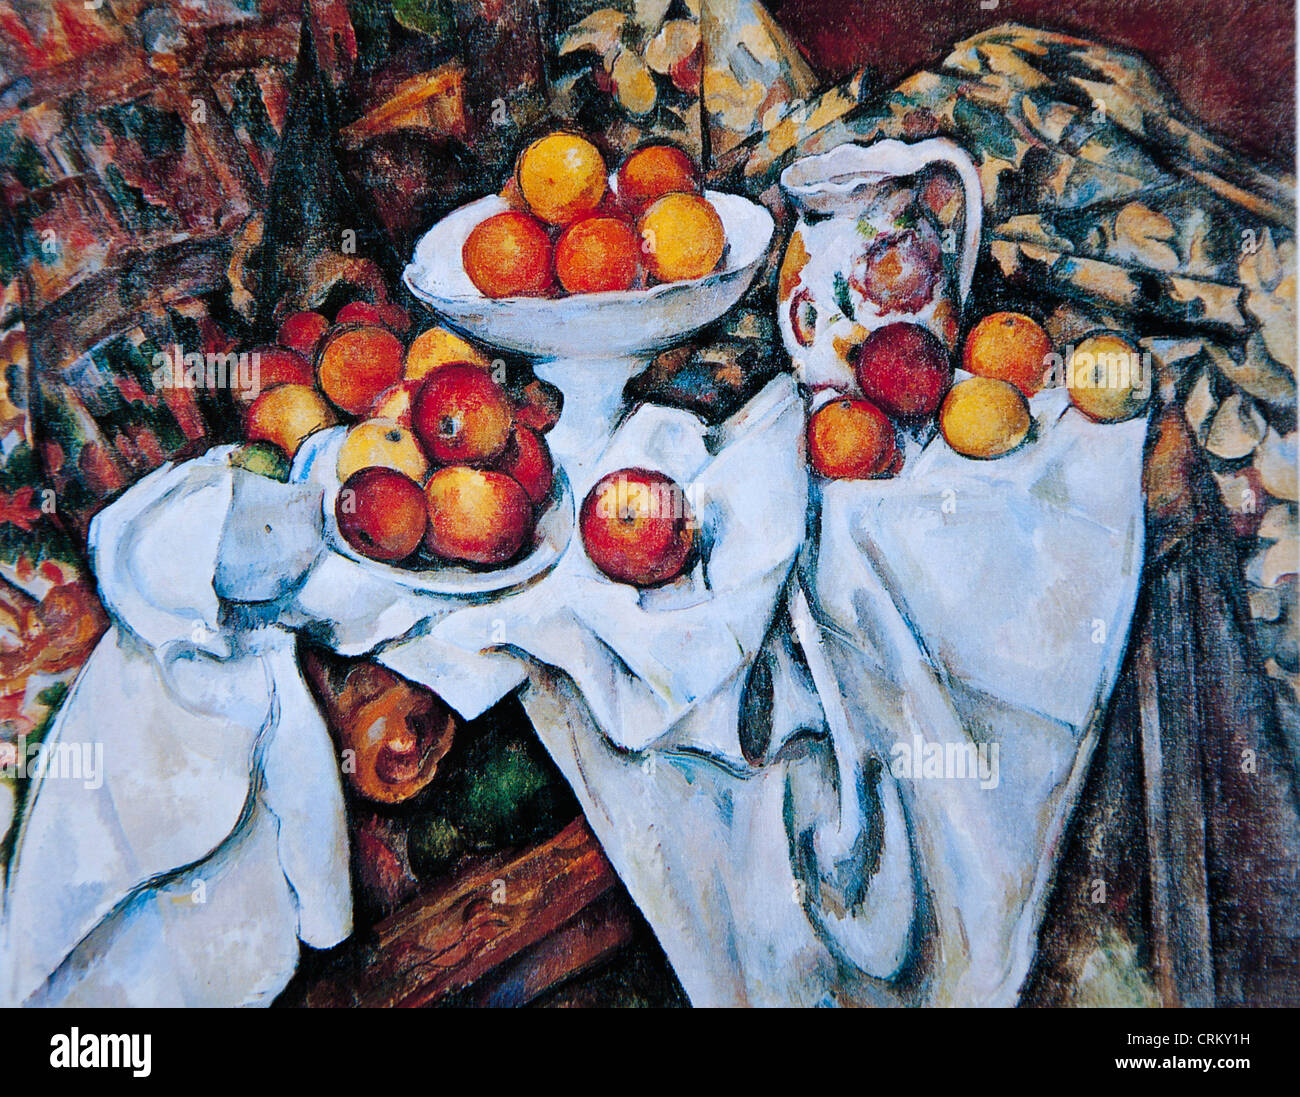 Paul Cezanne – Still Life with Apples and Oranges Stock Photo